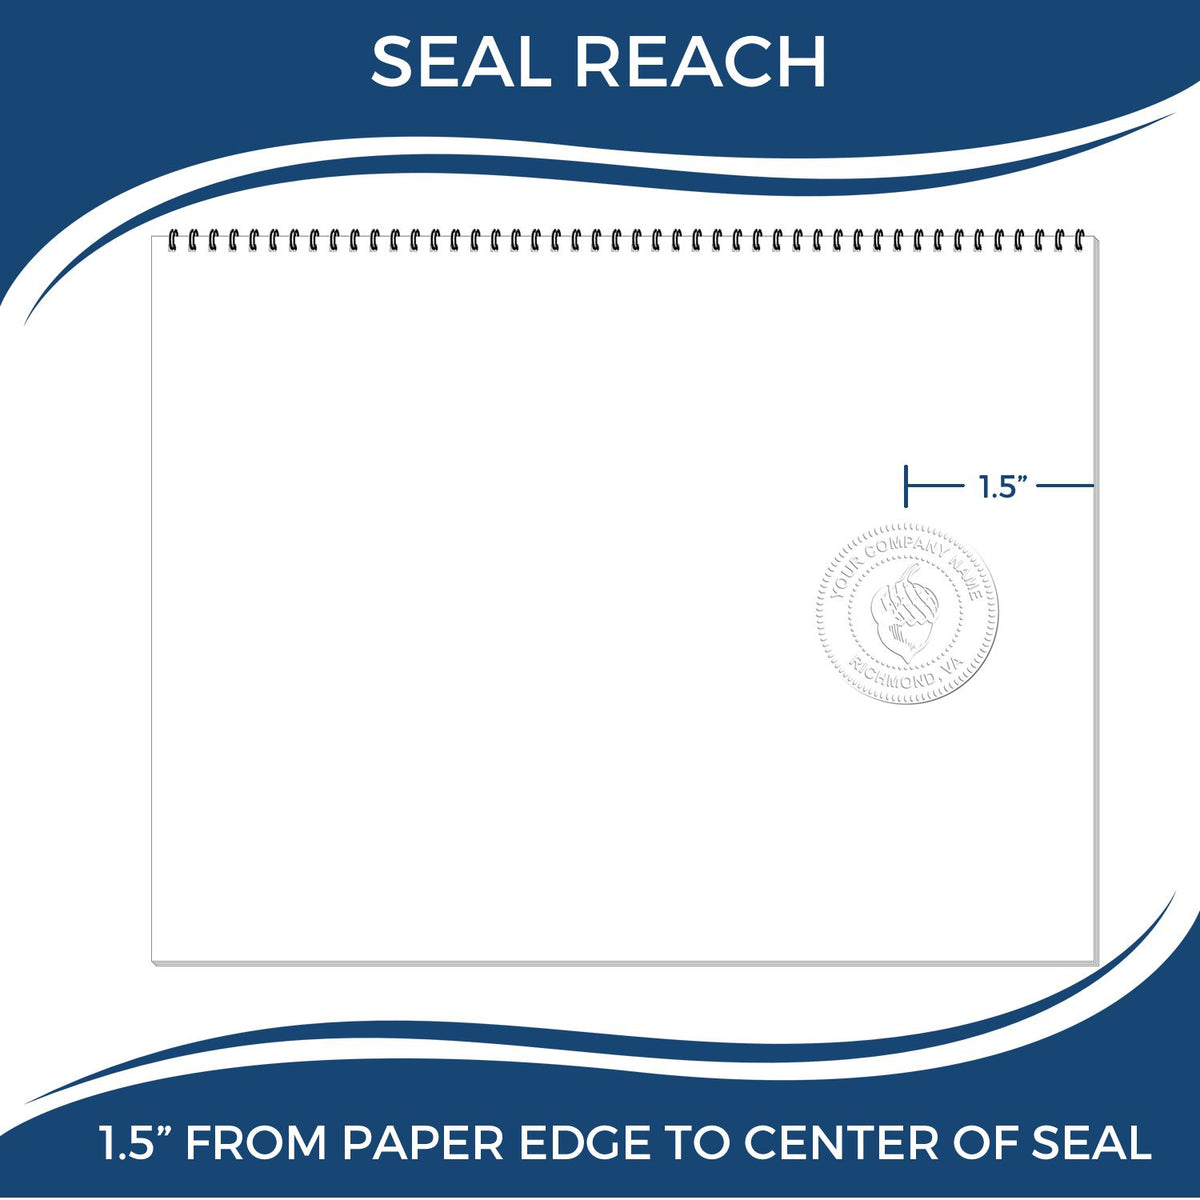 An infographic showing the seal reach which is represented by a ruler and a miniature seal image of the Gift Mississippi Architect Seal